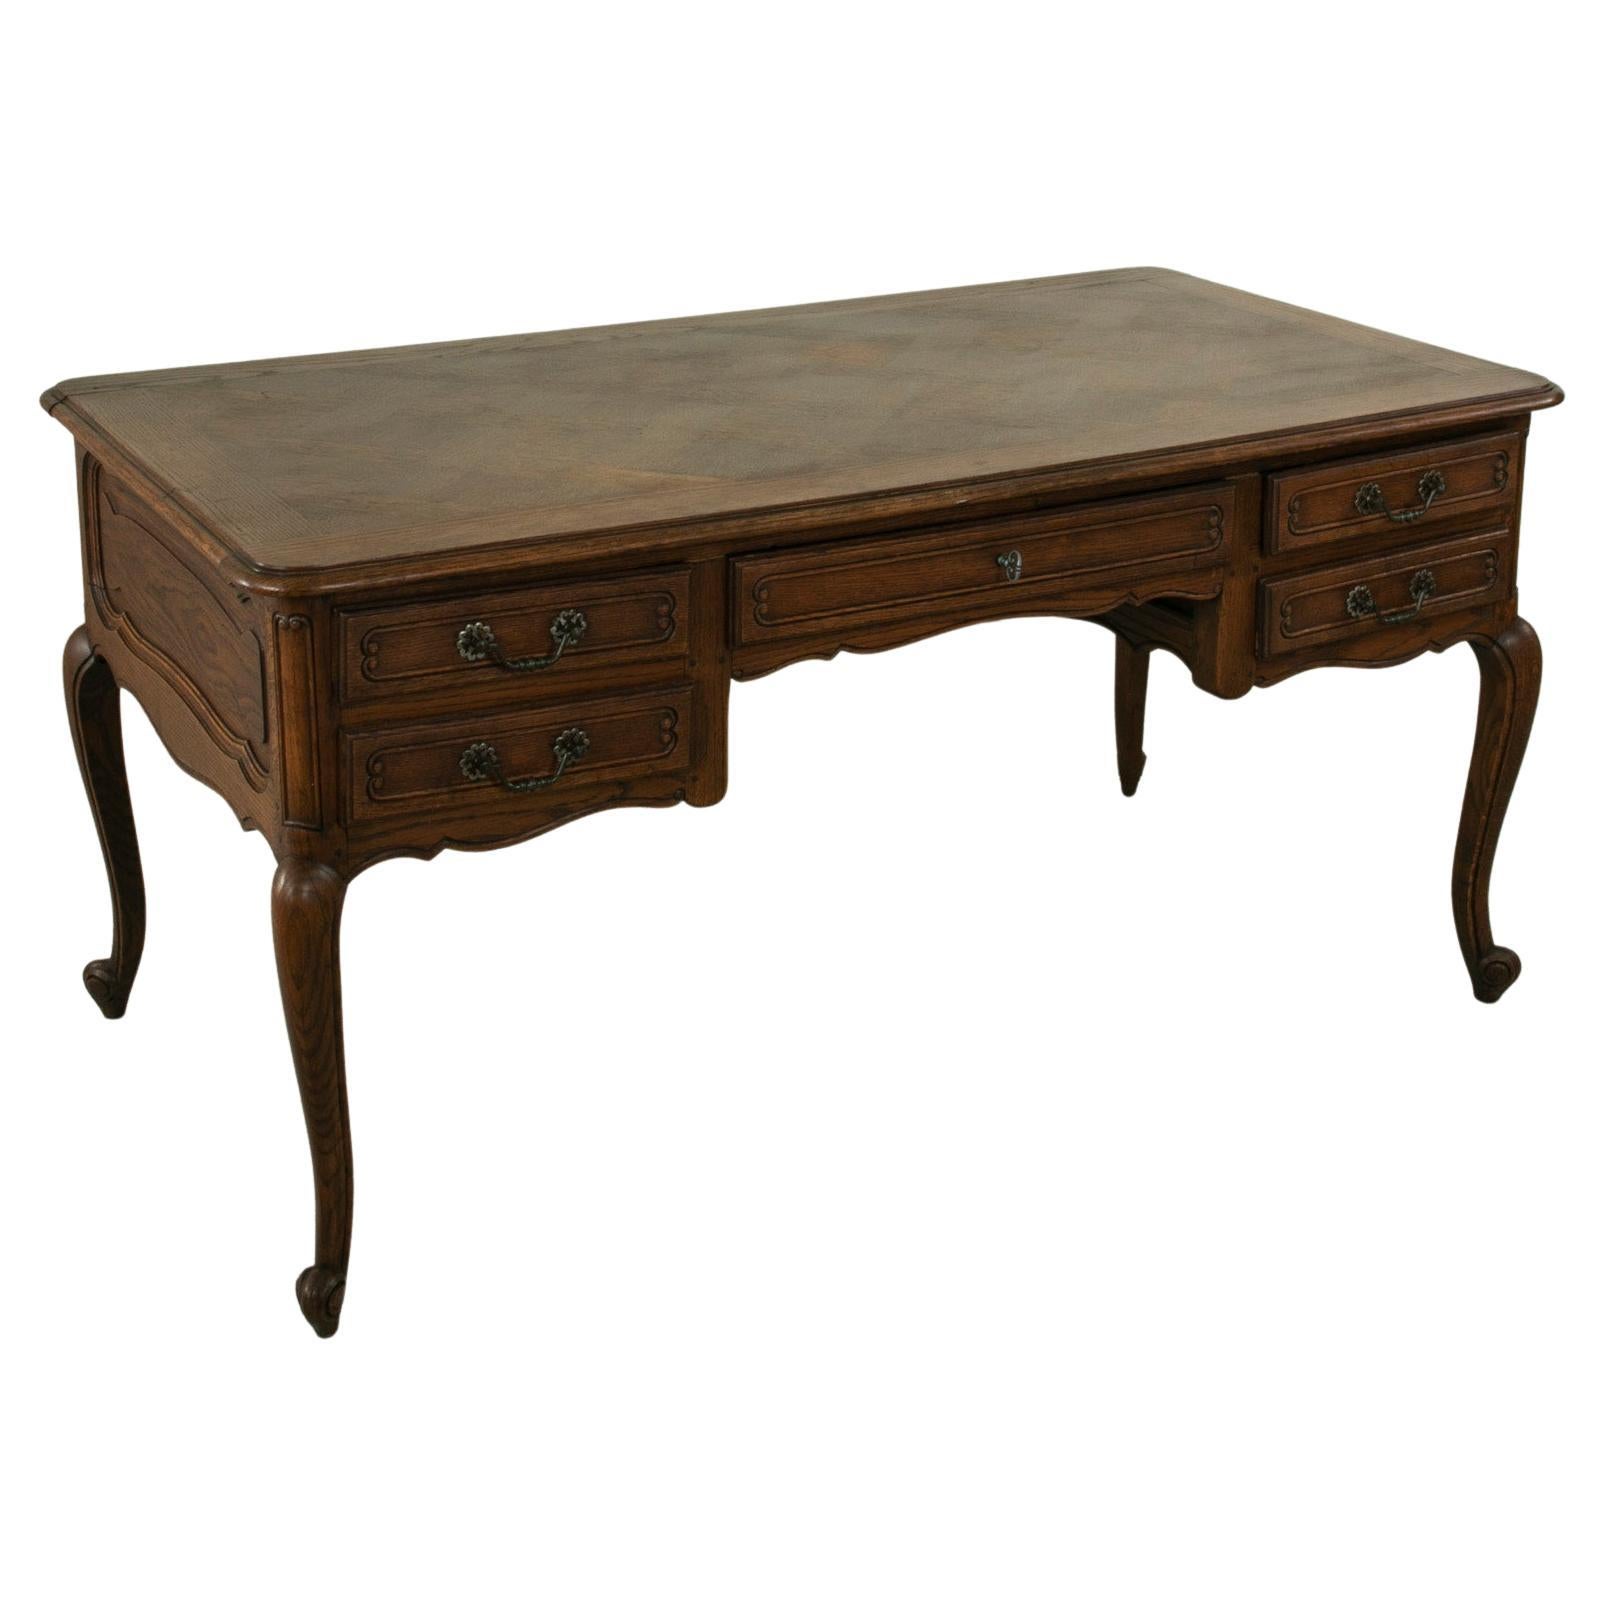 Mid-20th Century French Louis XV Style Oak Desk, Parquet Top, Five Drawers